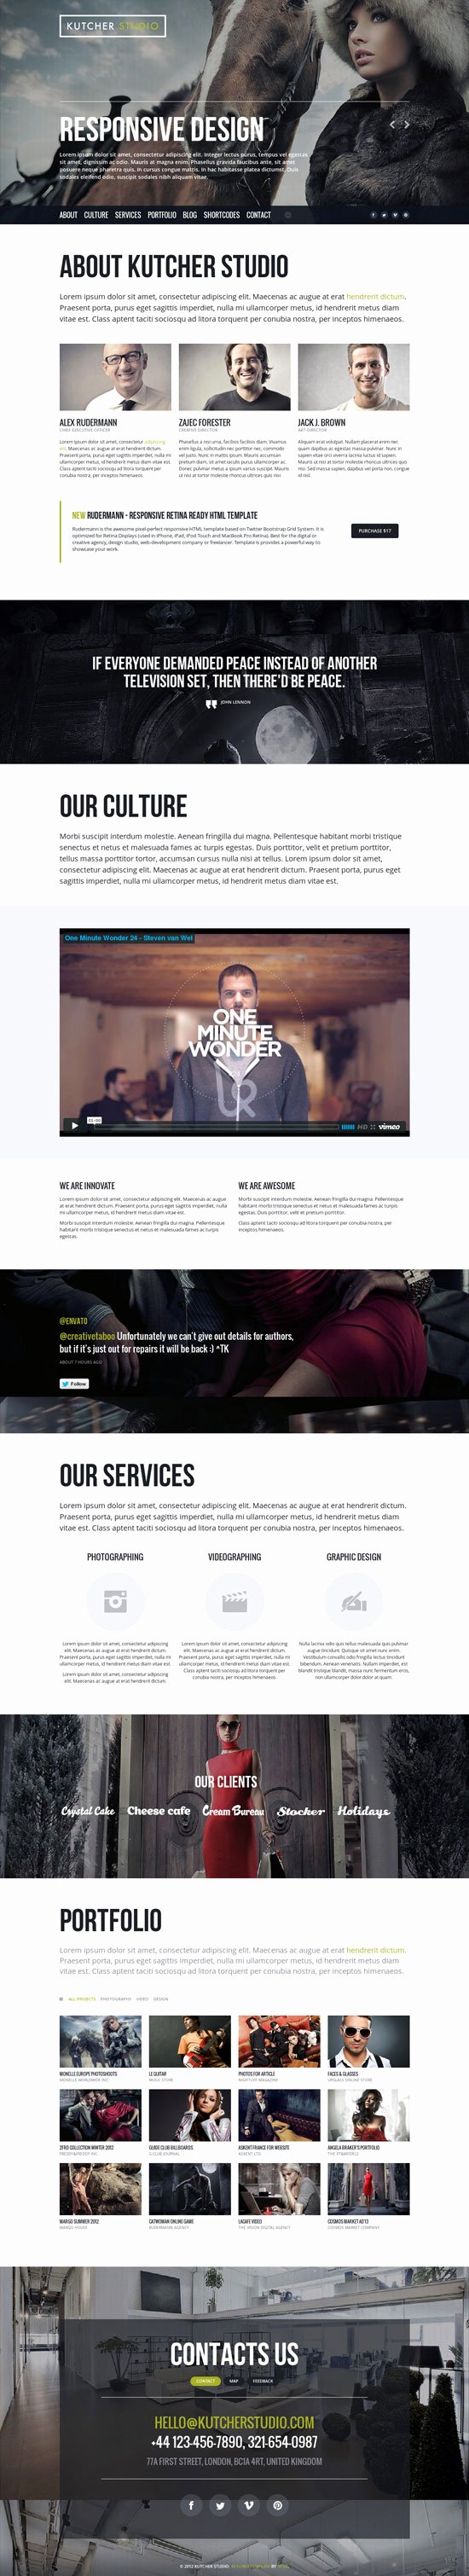 amazing one page parallax scrolling website templates